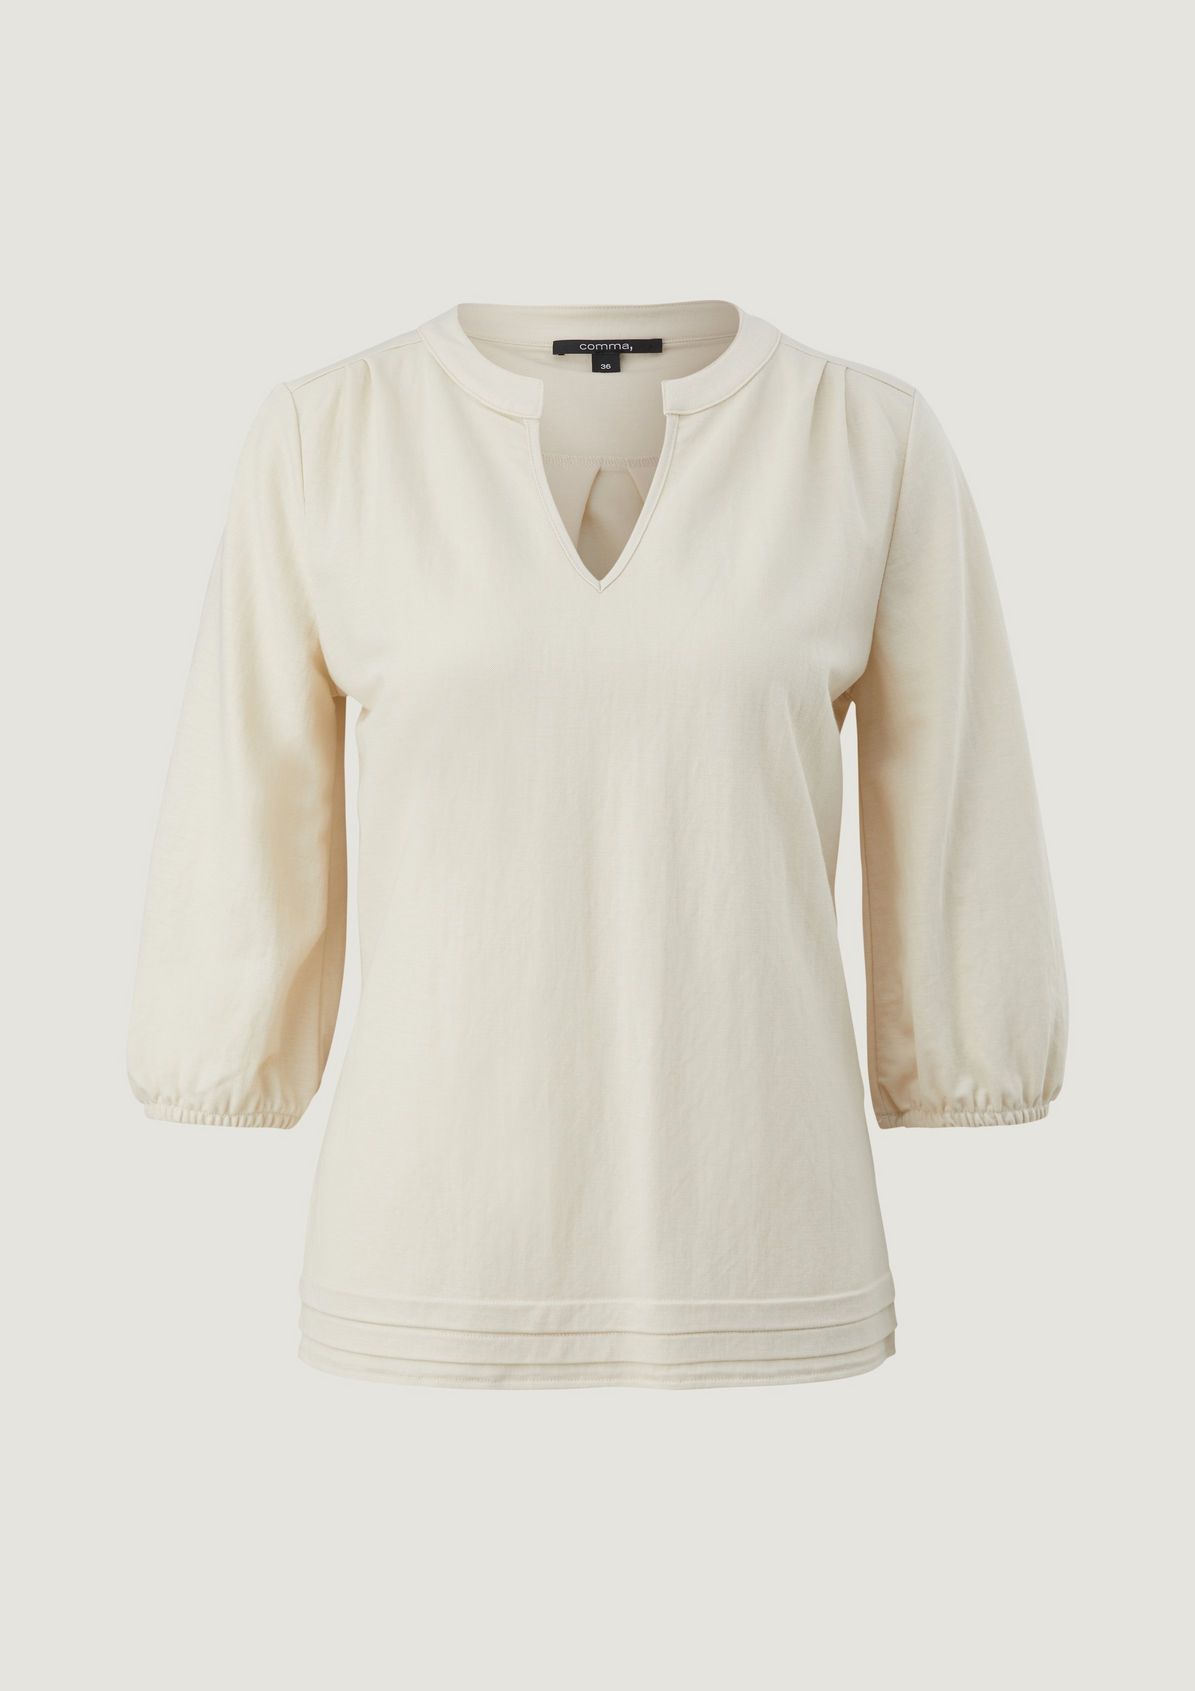 Viscose blend top from comma